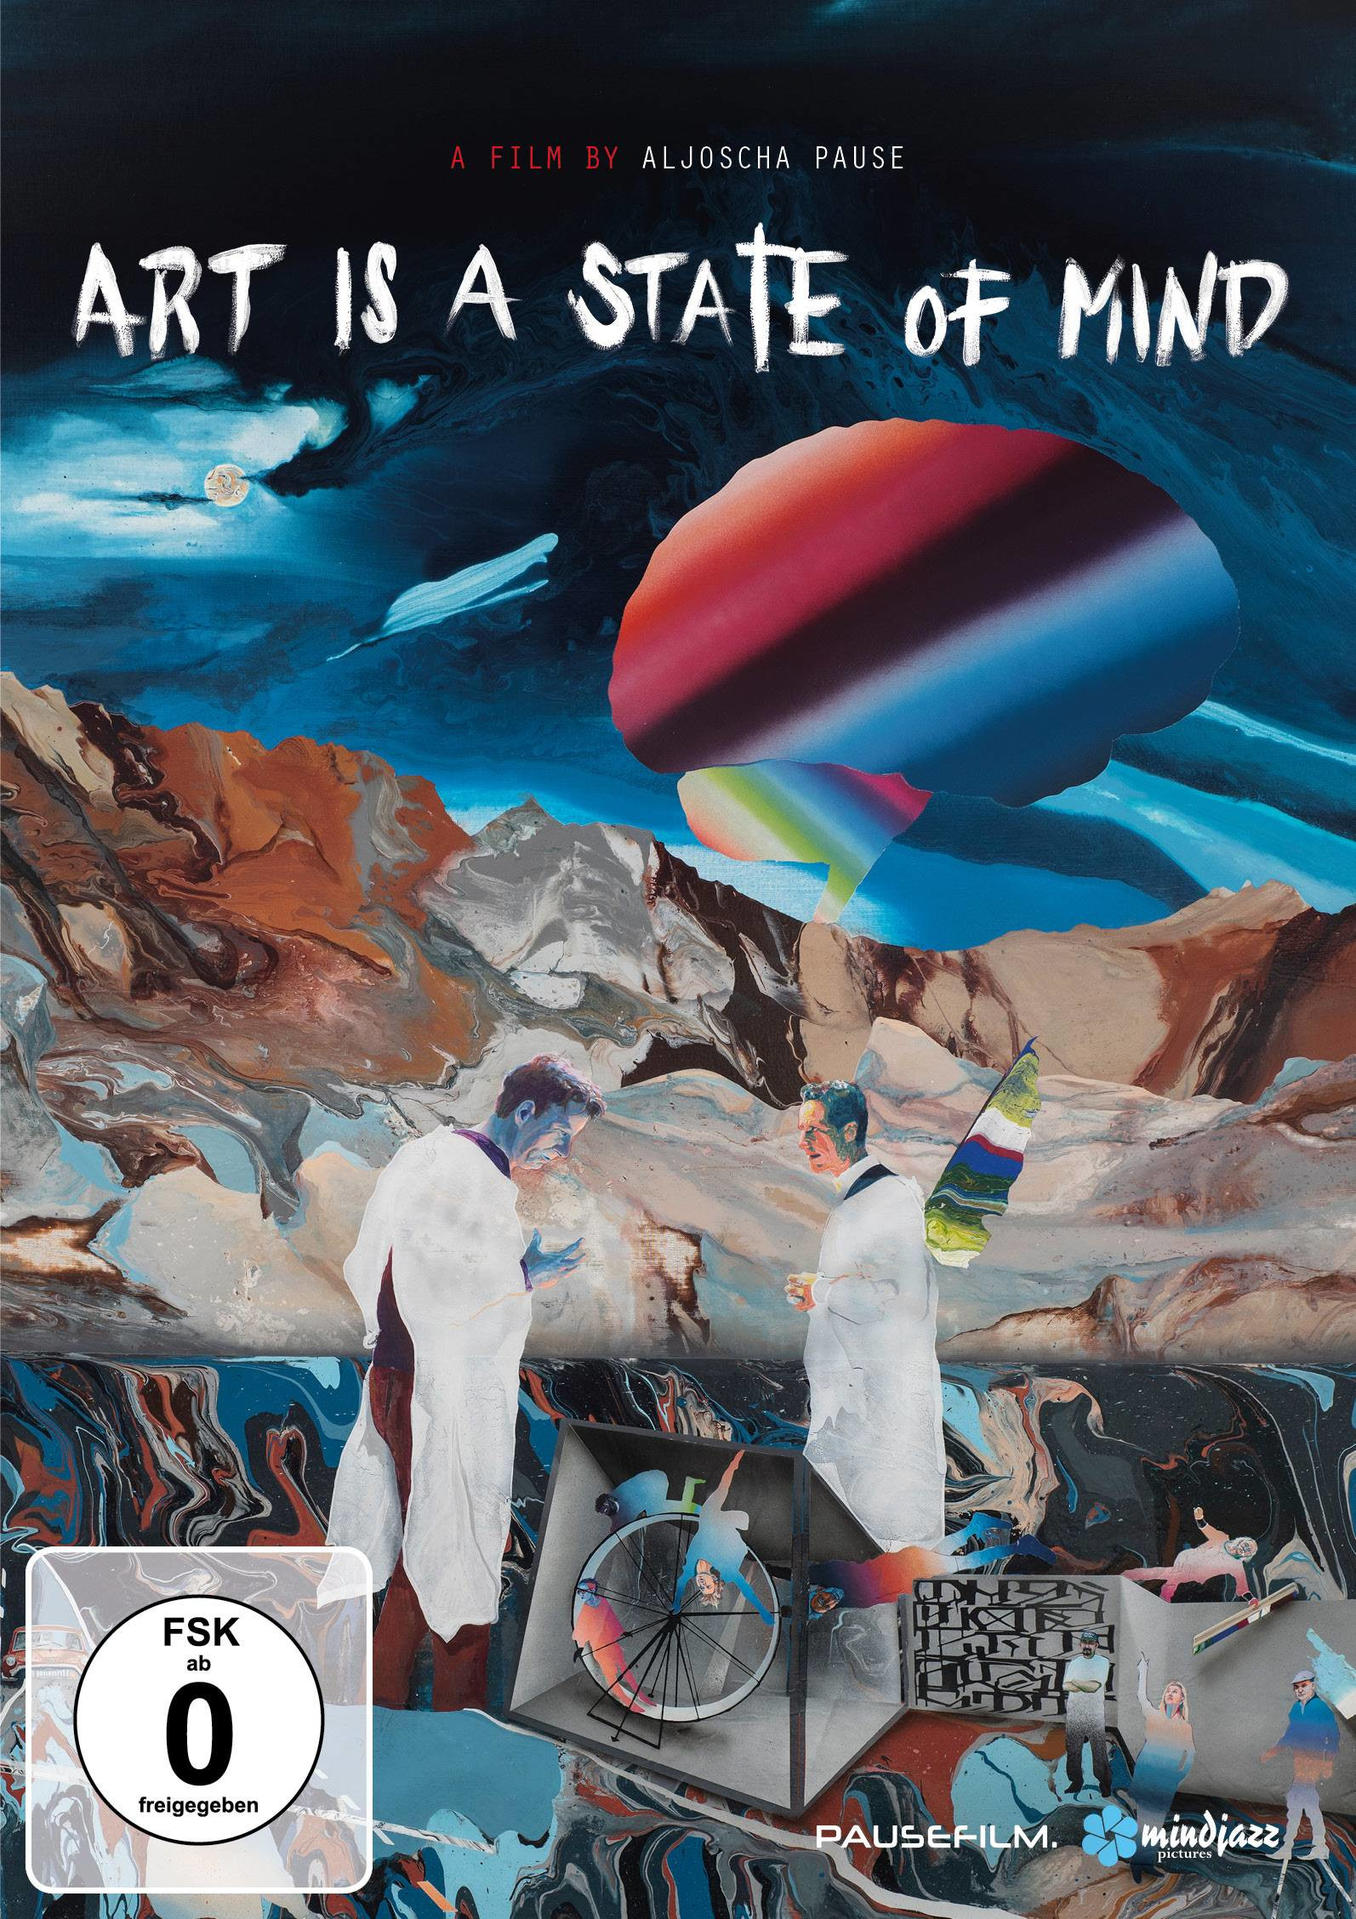 Art is a Mind of Blu-ray State